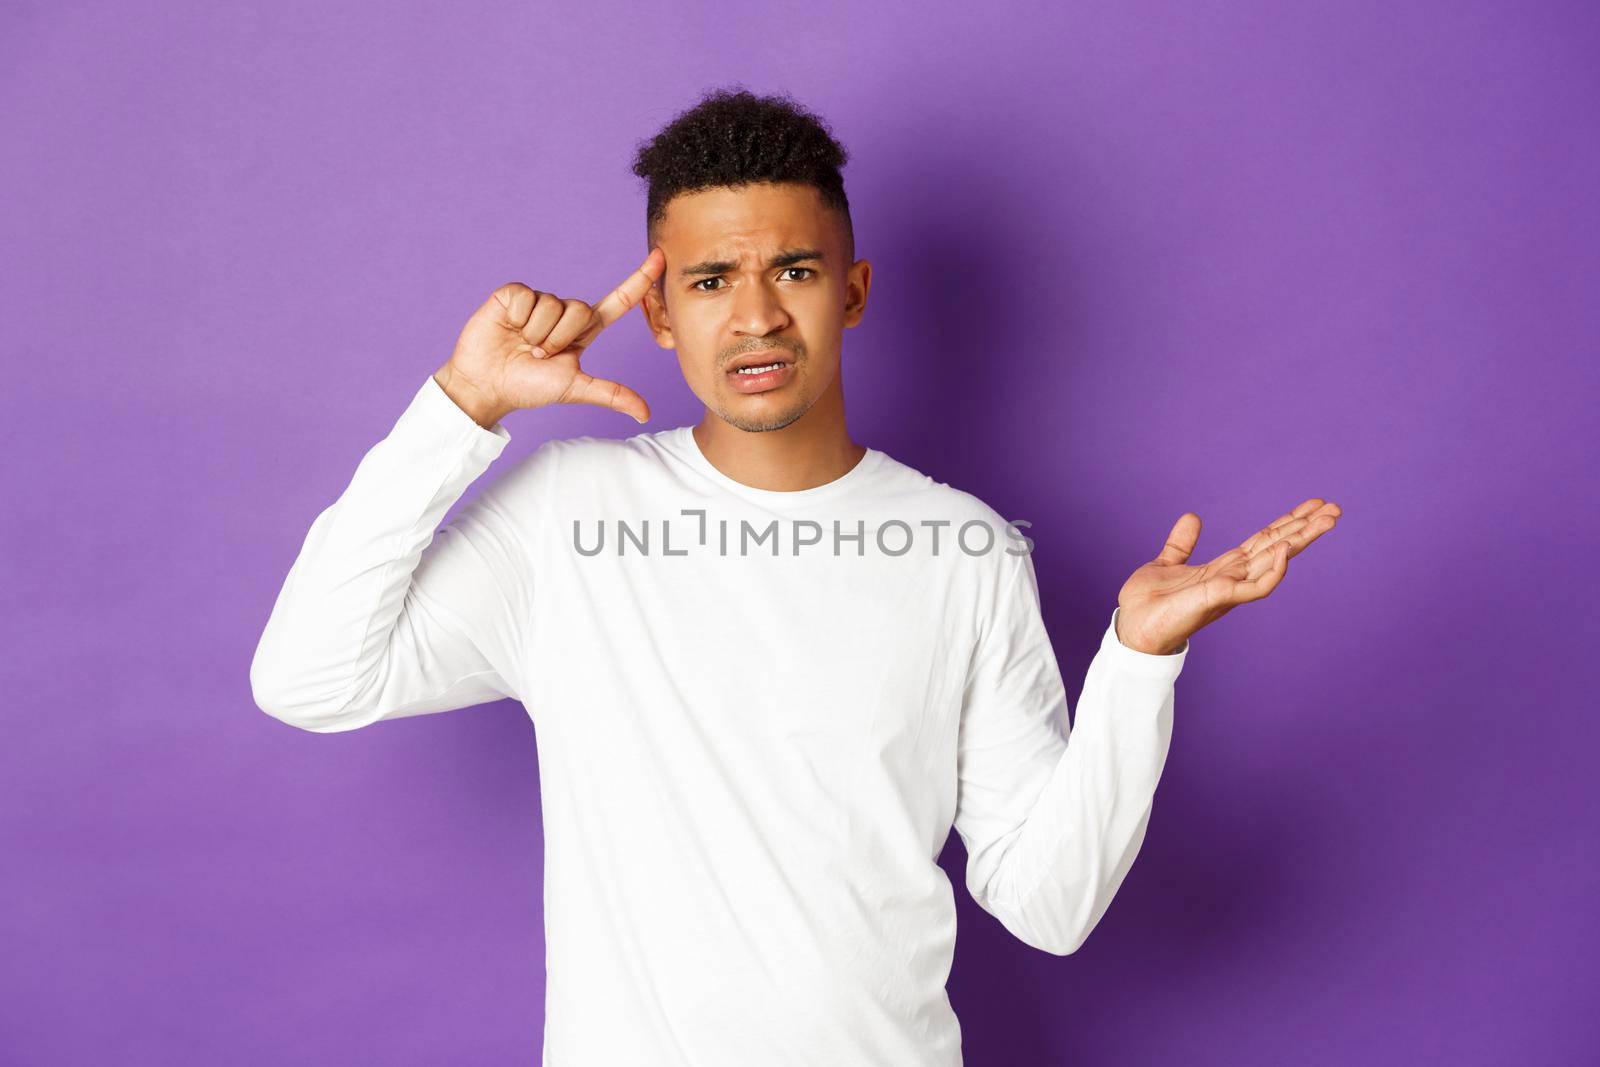 Image of angry african-american man, looking confused, pointing at head and scolding person for stupid action, standing over purple background.